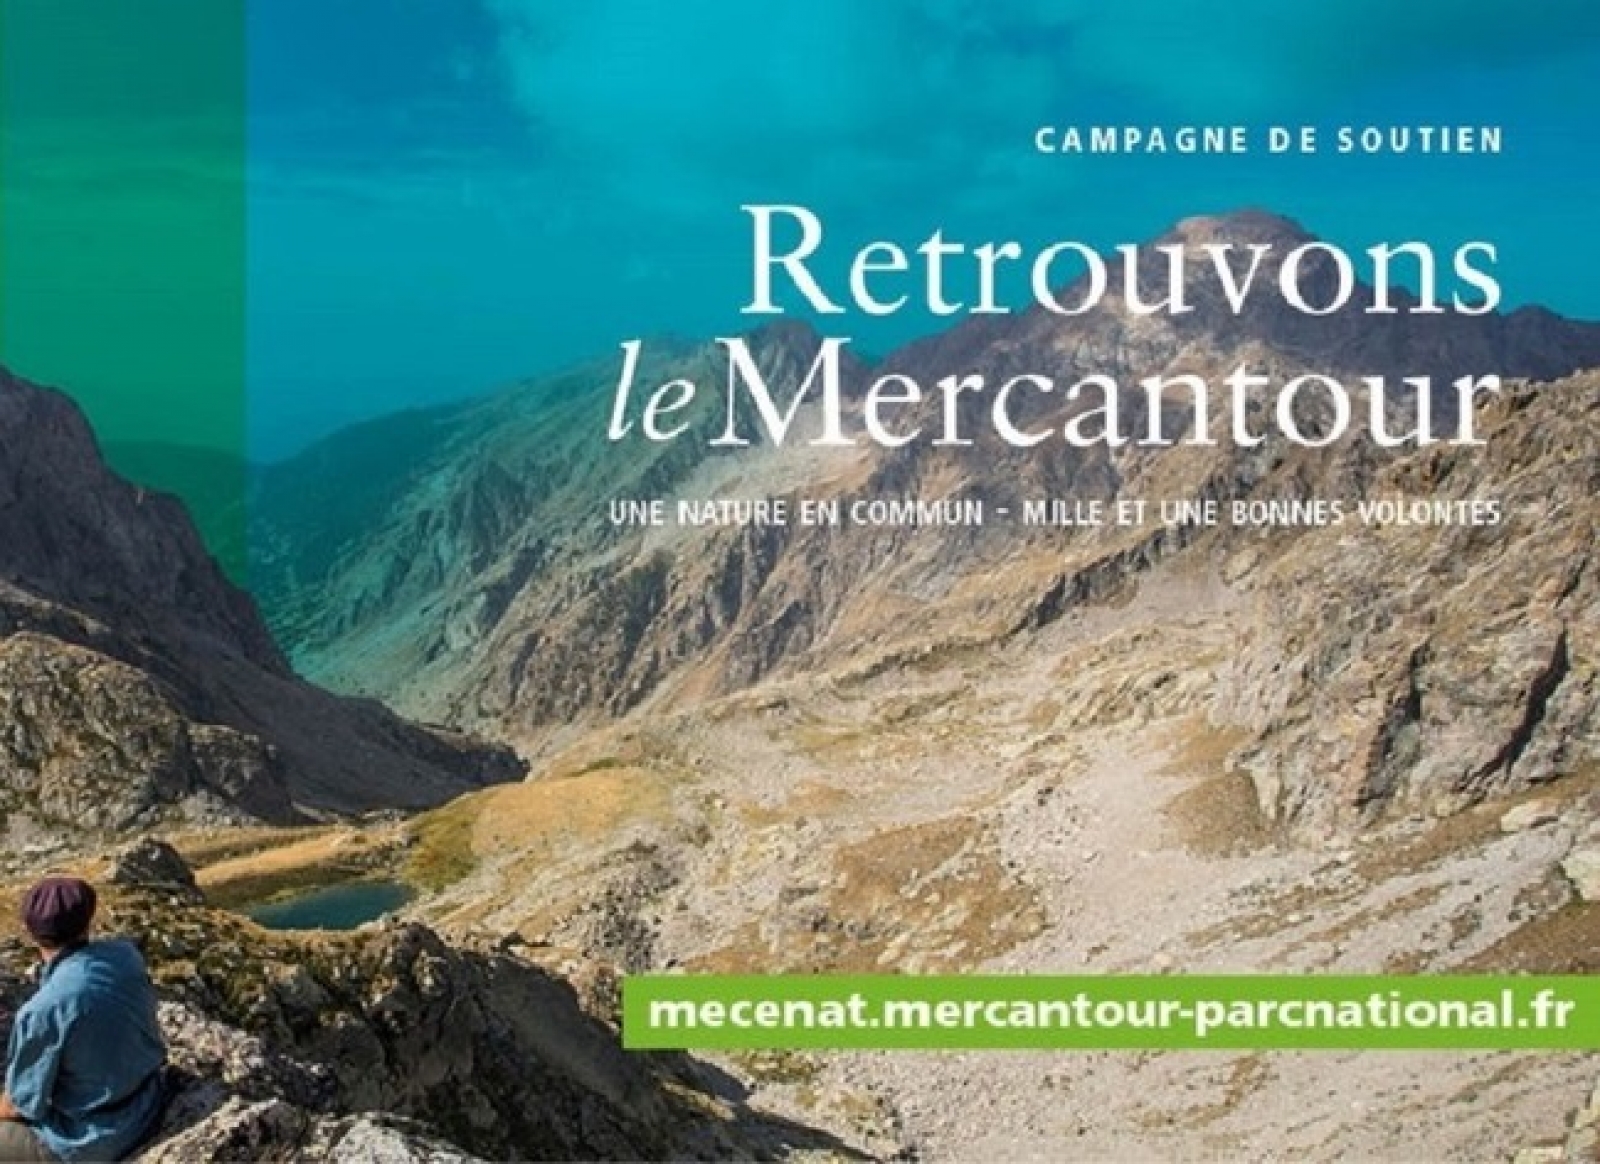 Support the restoration of hiking trails in the Mercantour National Park